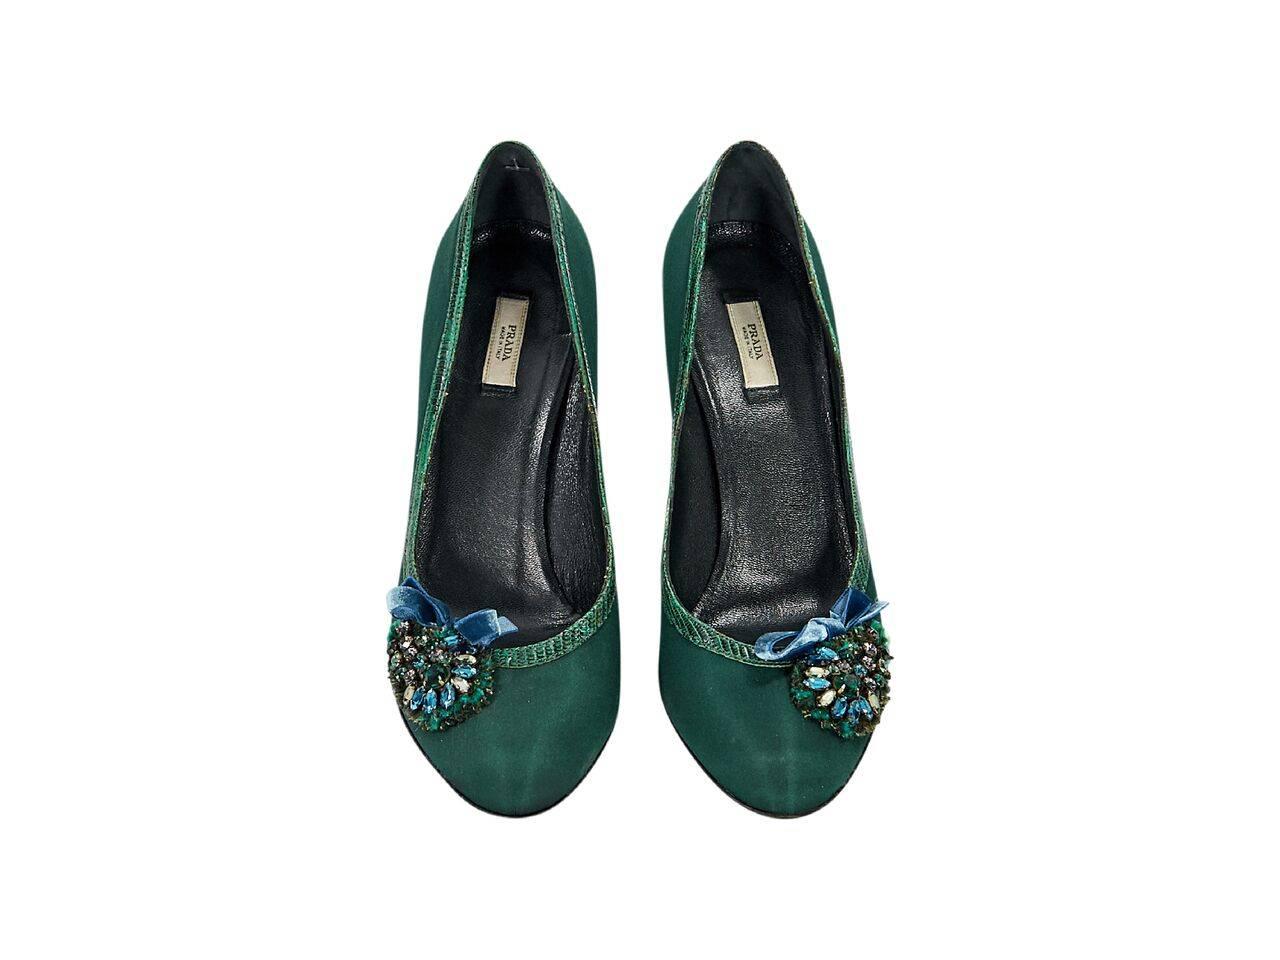 Product details:  Emerald green satin pumps by Prada.  Lizard skin trim.  Bejeweled detail accents vamp.  Round toe.  Slip-on style. 
Condition: Pre-owned. Very good.
Est. Retail $ 428.00